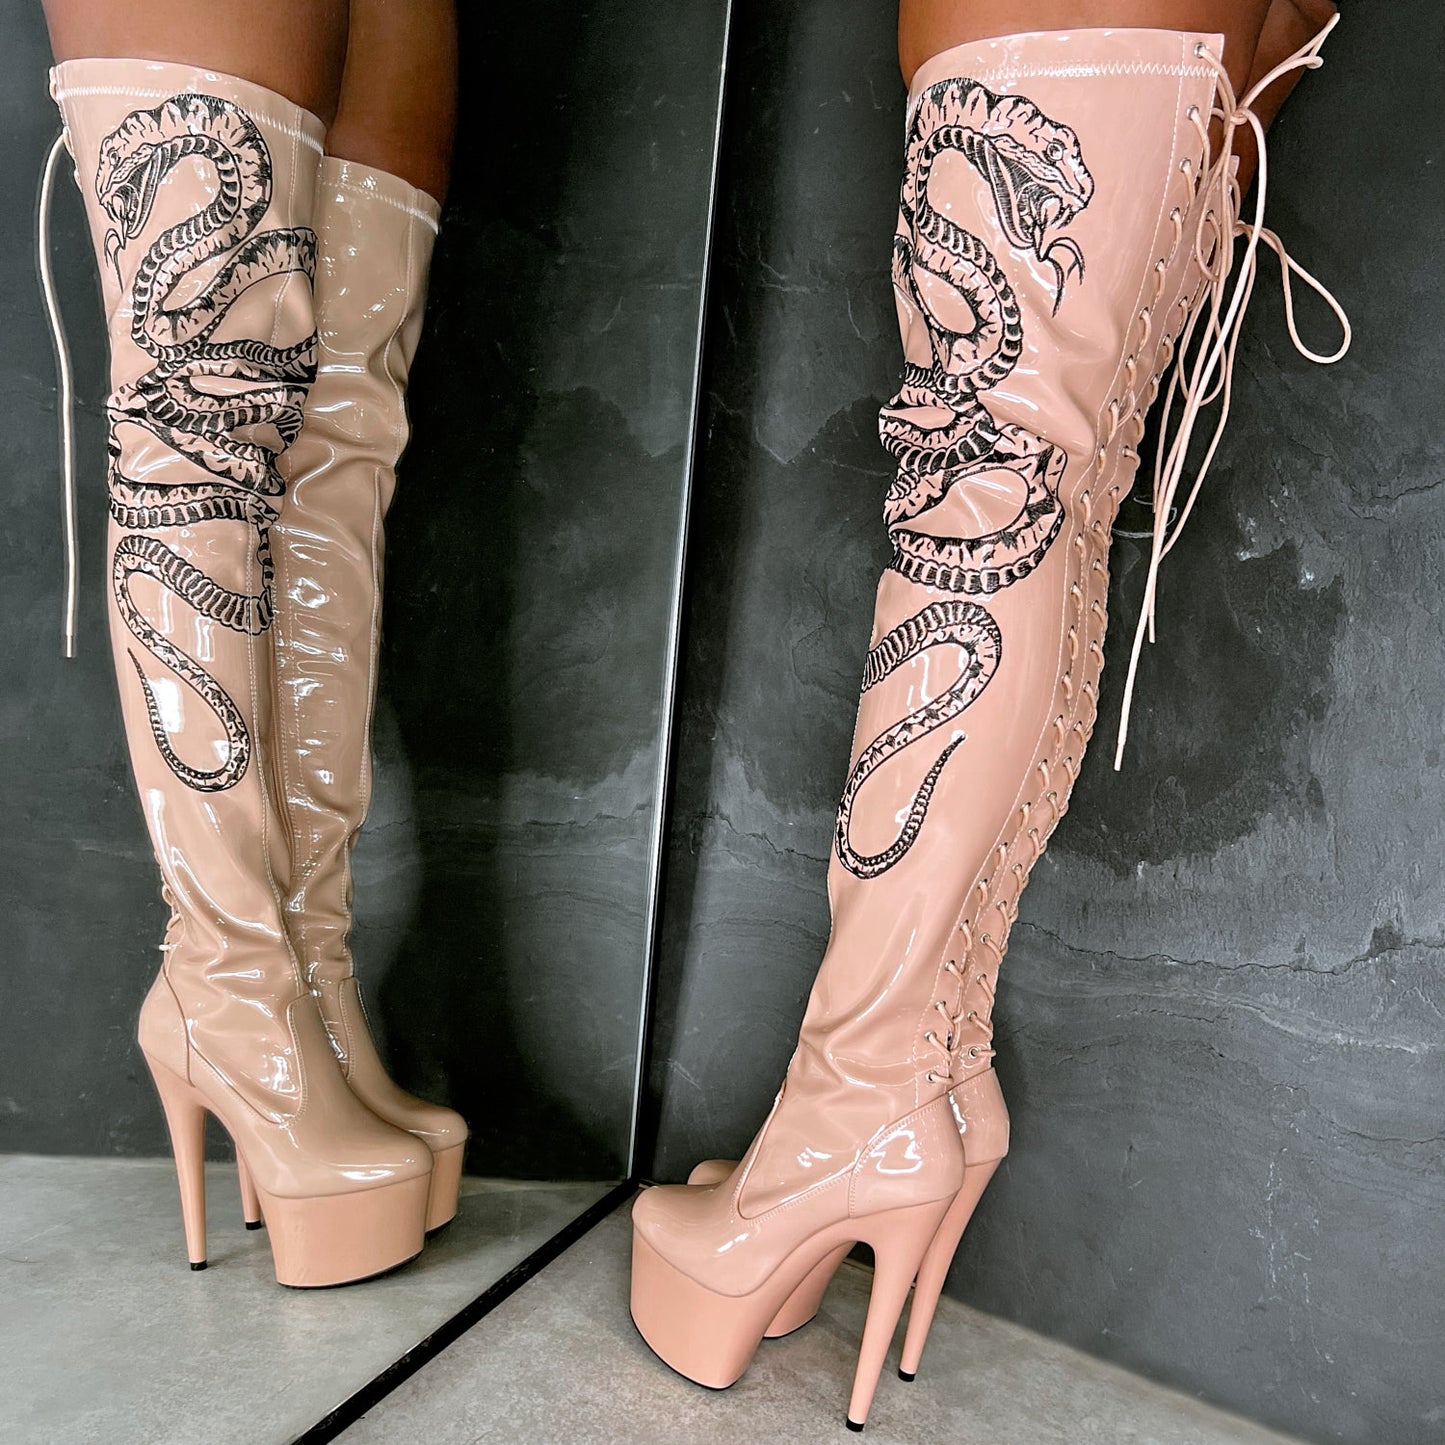 VIPER Boot Tan with Black Thigh High - 7INCH